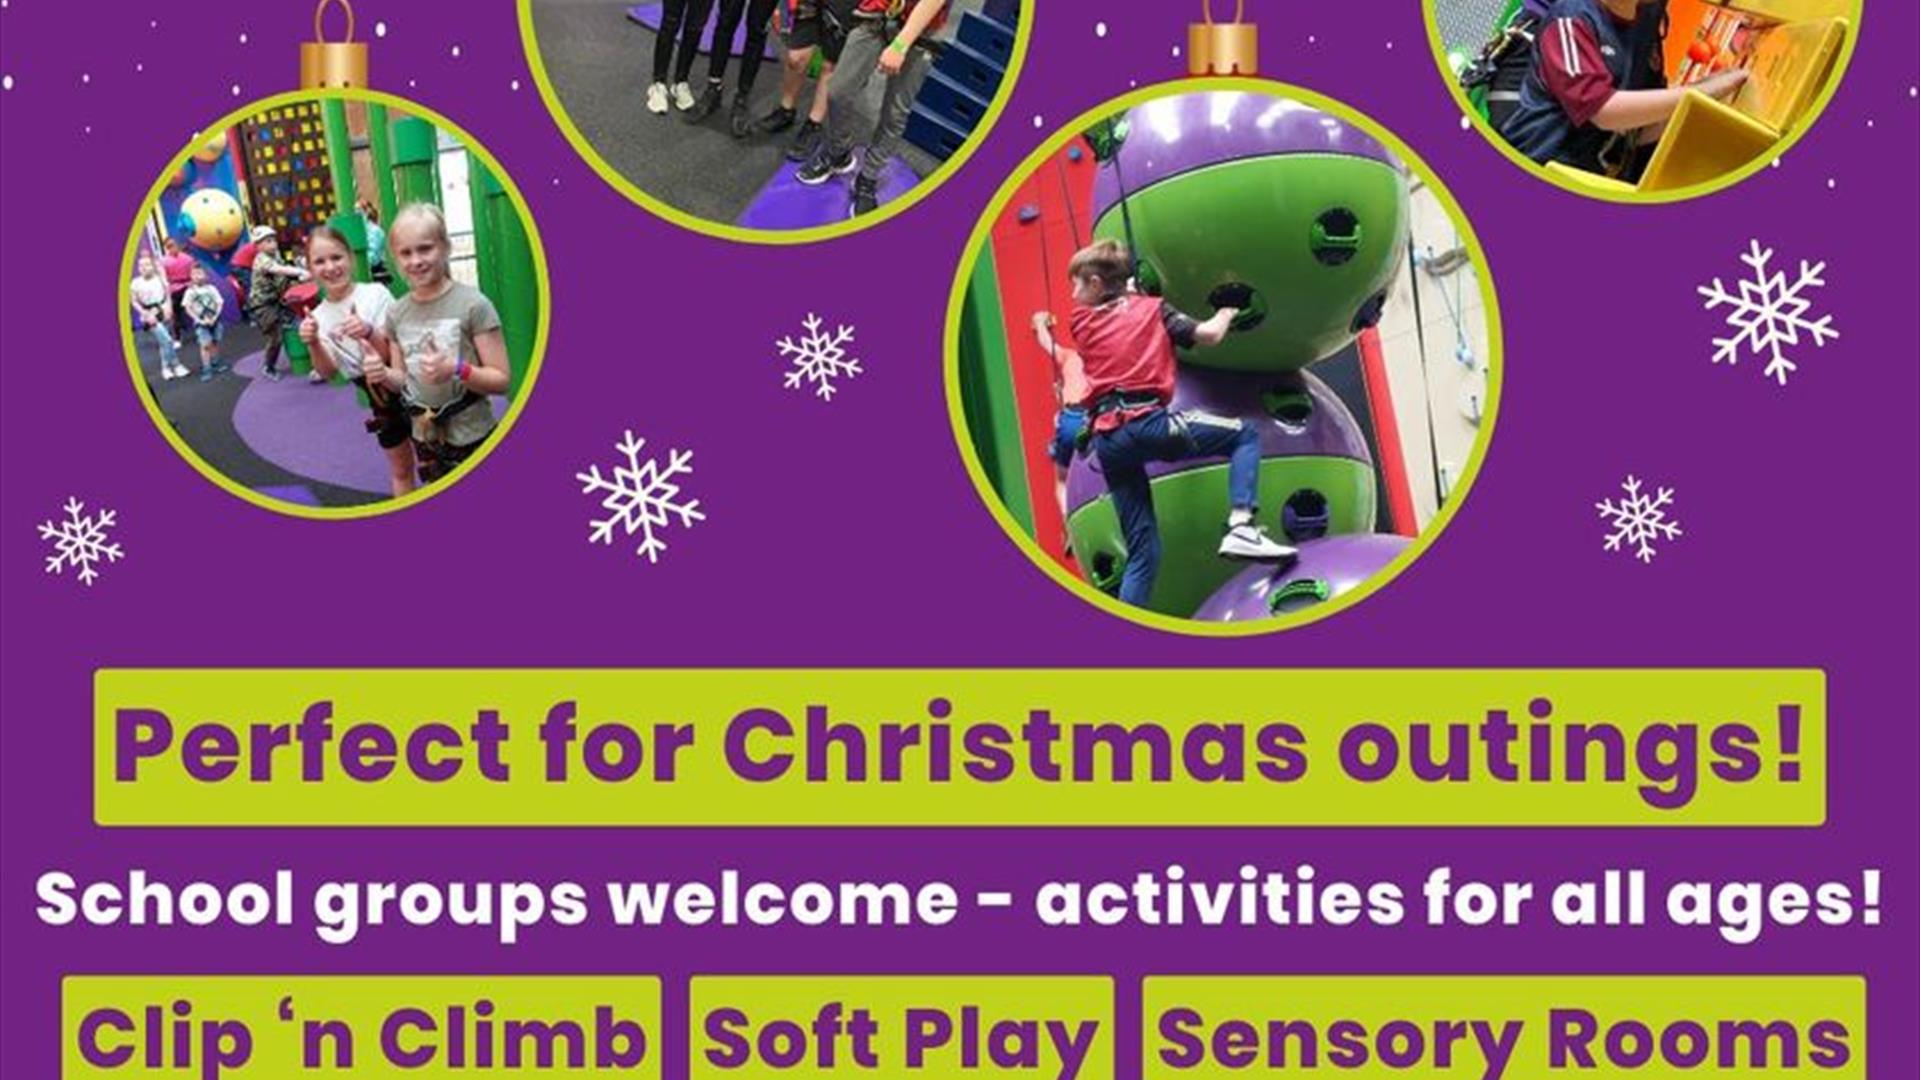 Image shows a purple poster with images of climbing walls and activities in High Rise promoting clip 'n Climb, Soft Play and Sensory Rooms. The writte